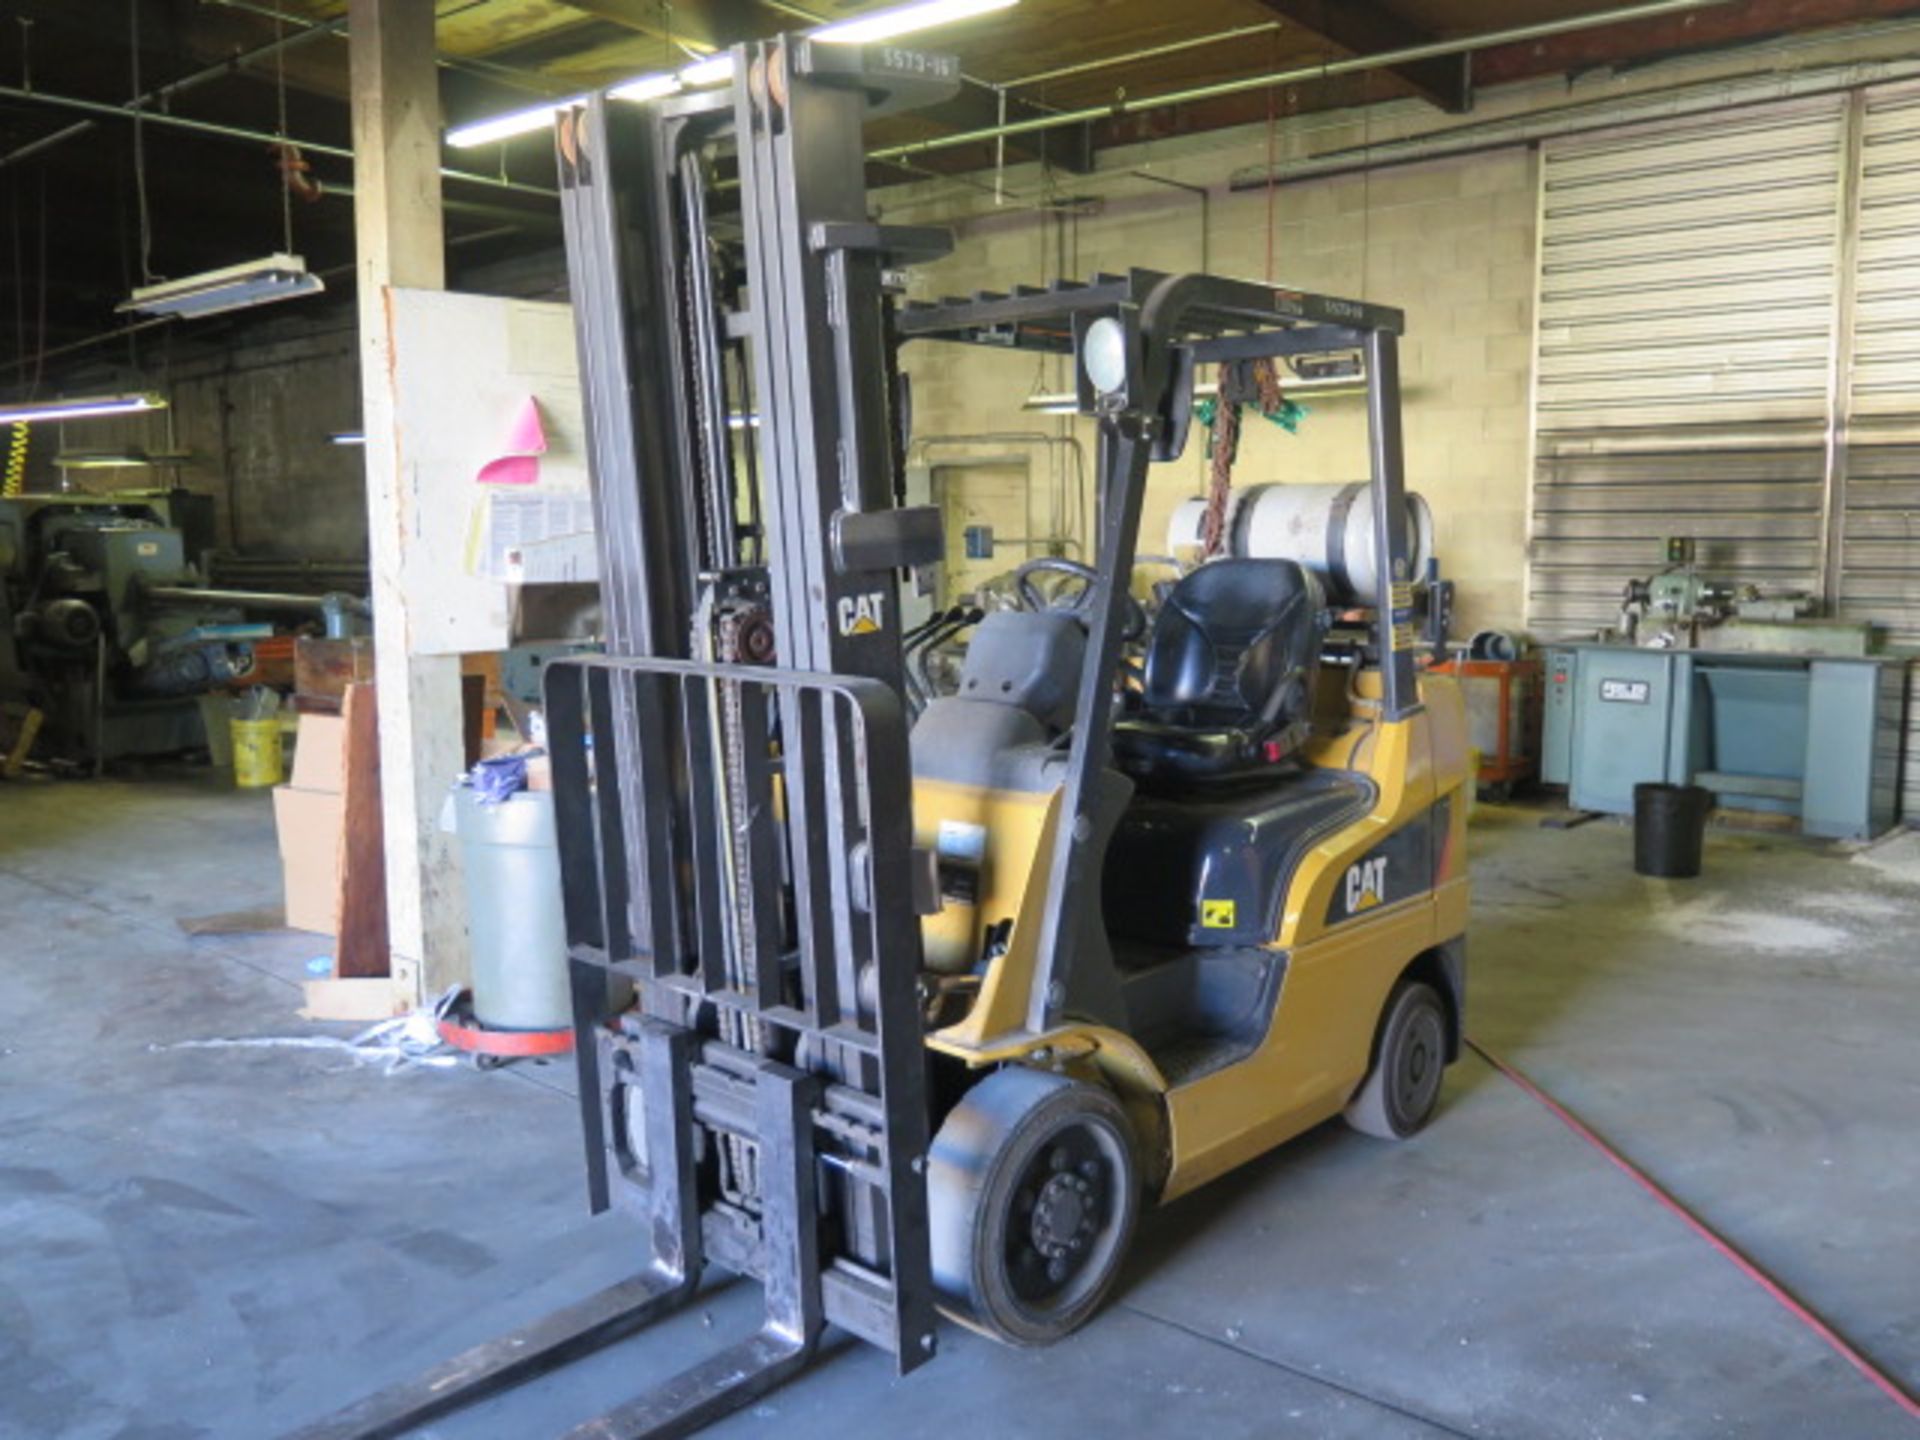 Caterpillar 2C5000 3150 Lb Cap LPG Forklift s/n AT9034227 w/ 3-Stage Mast, 217” Lift Height, Side